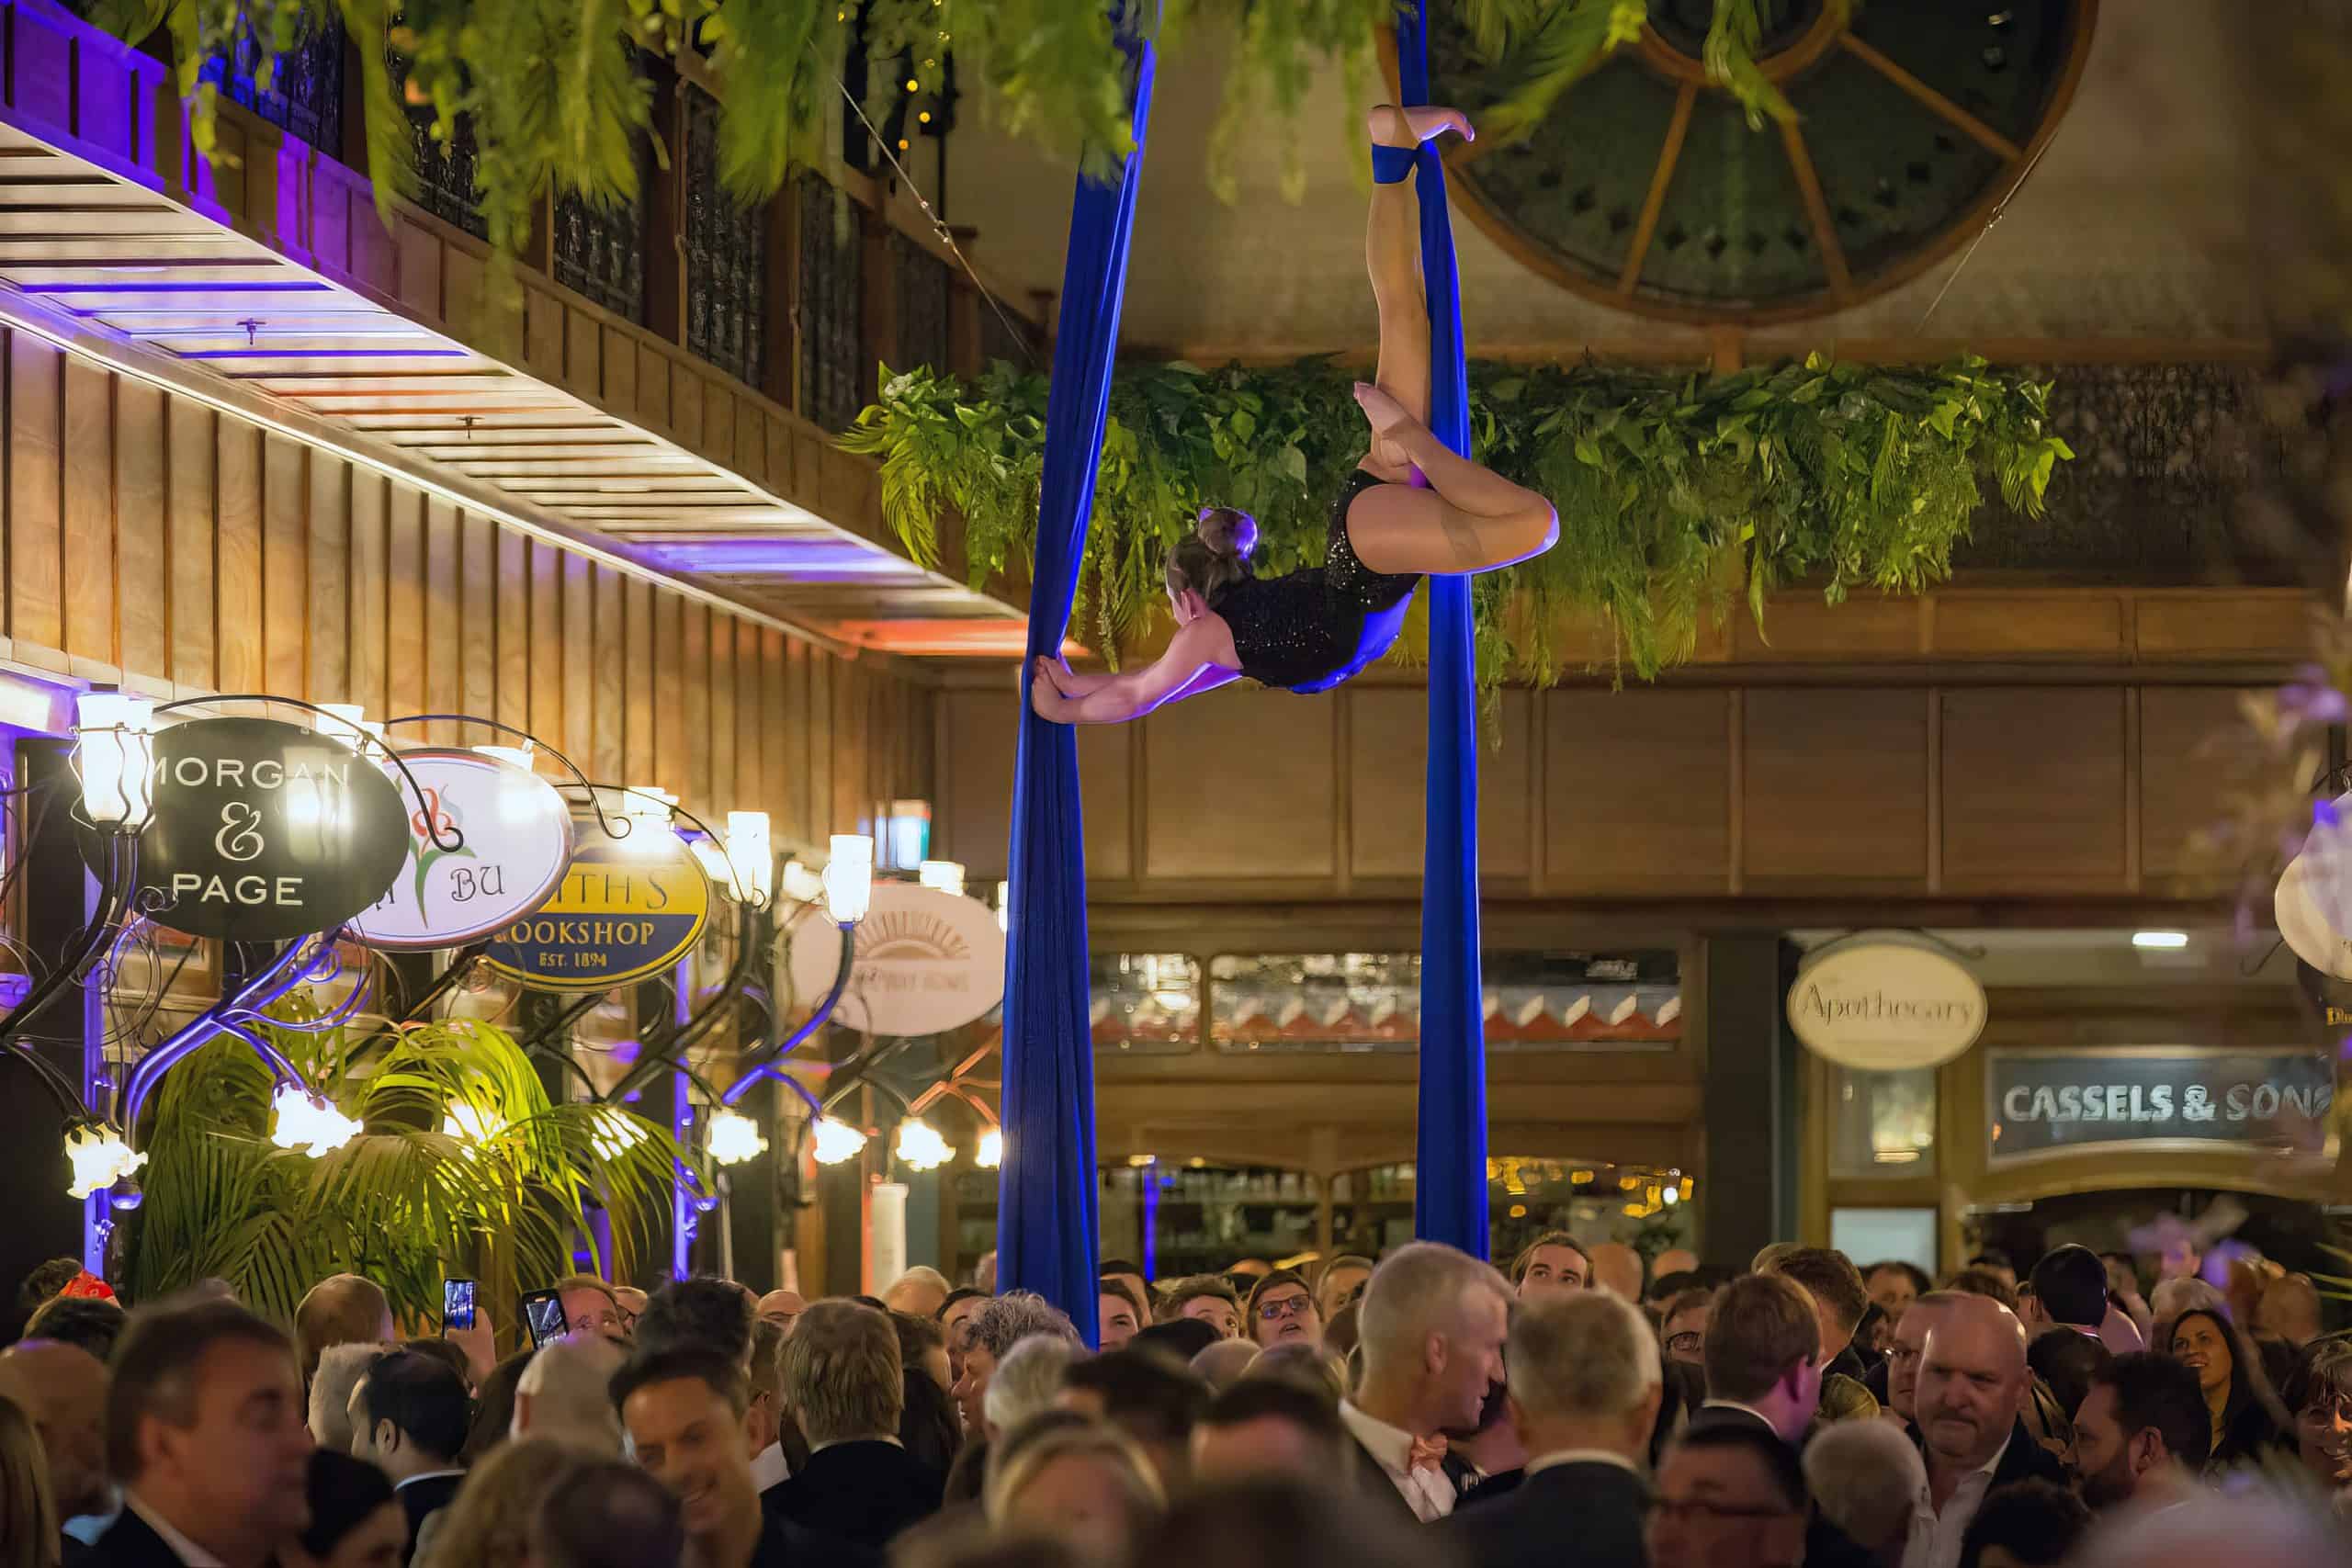 Aerial performer on ribbons performs above a large crowd enjoying an event hospitality event at The Tannery, Christchurch.